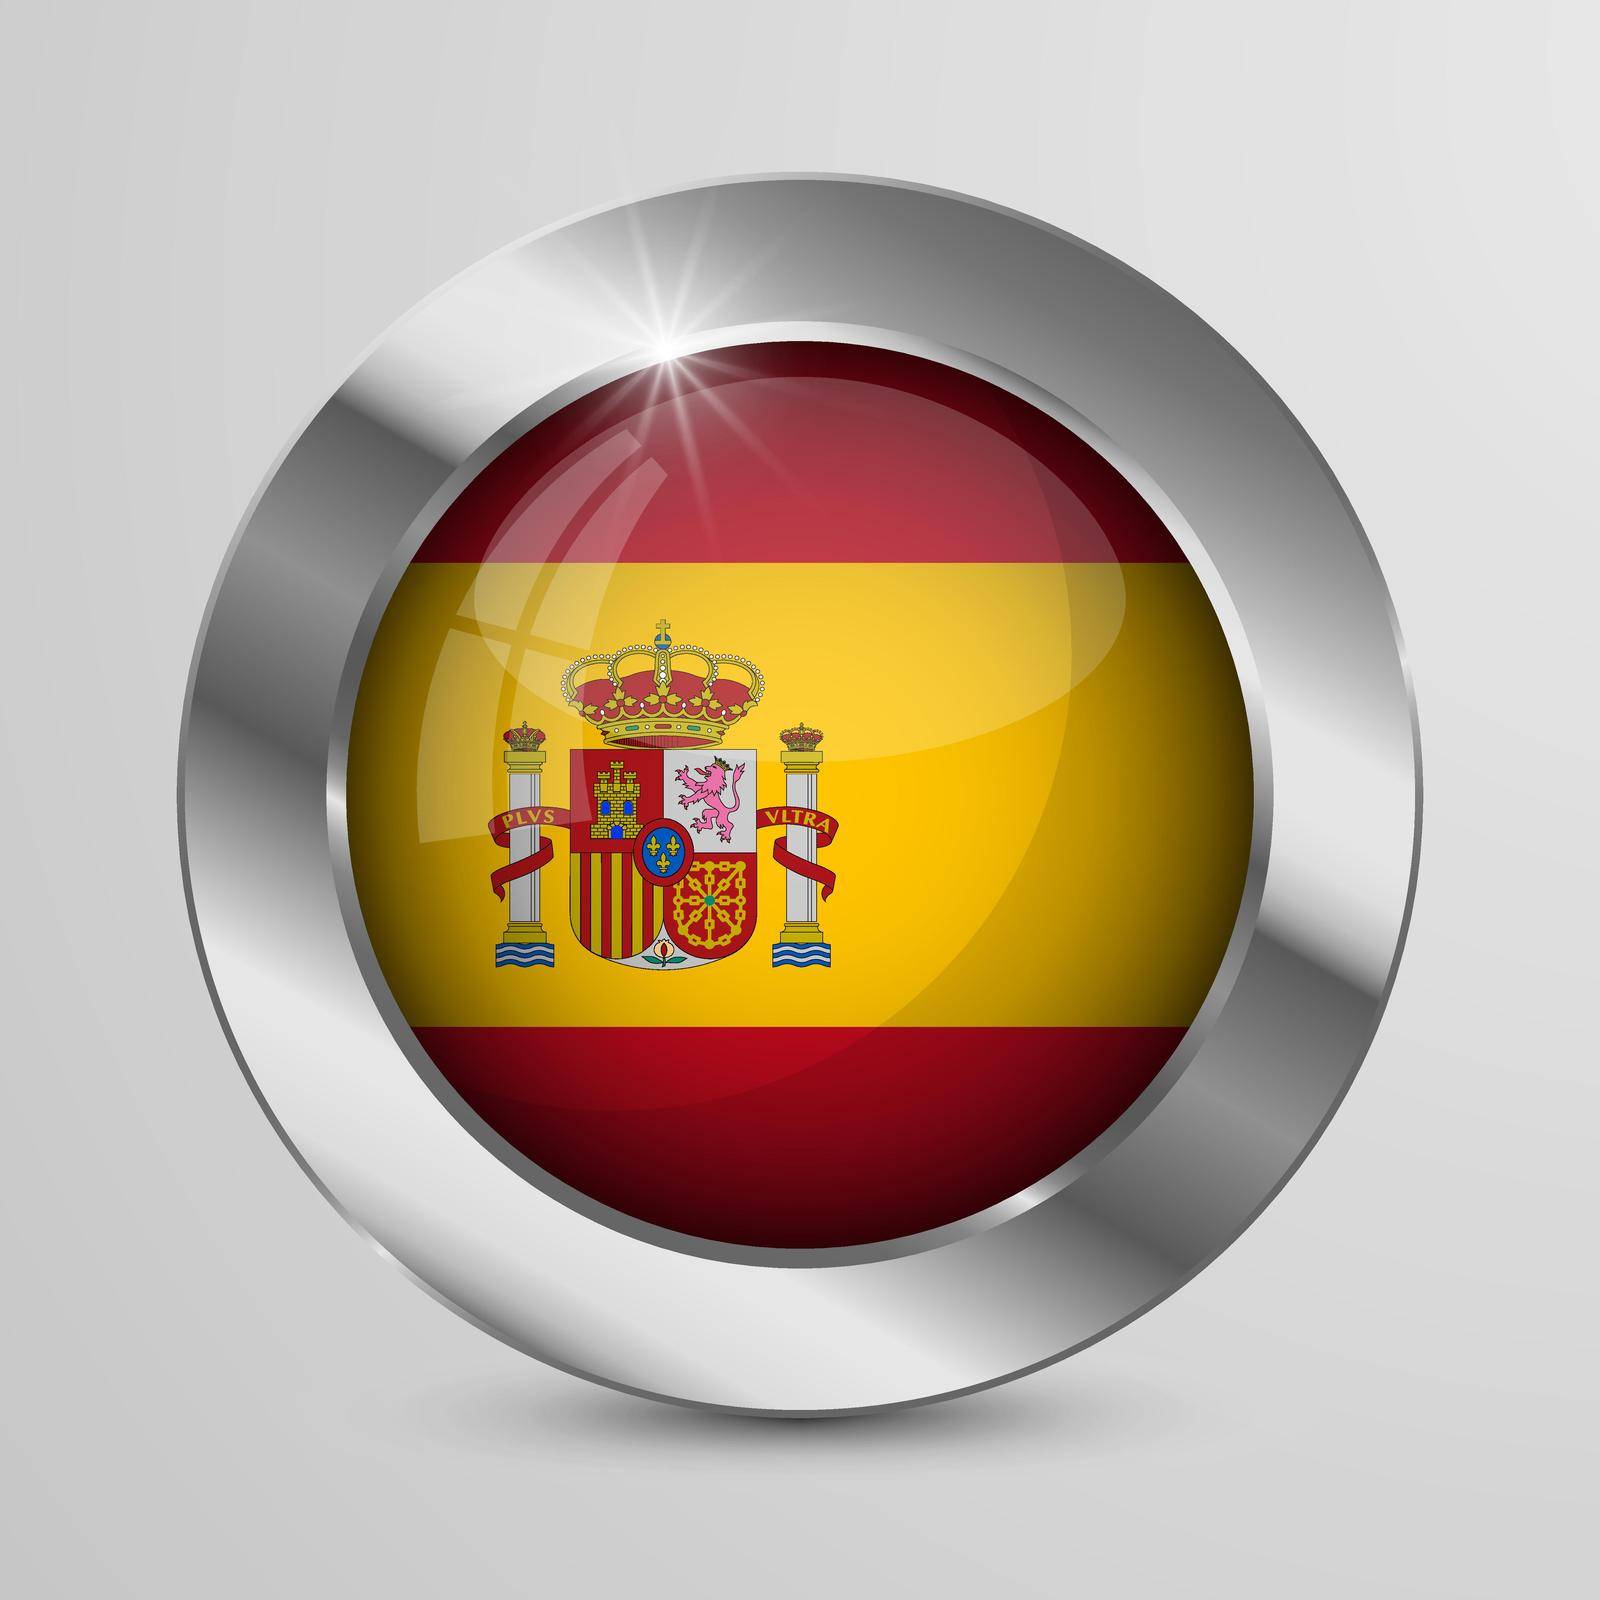 EPS10 Vector Patriotic Button with Spain flag colors. An element of impact for the use you want to make of it.